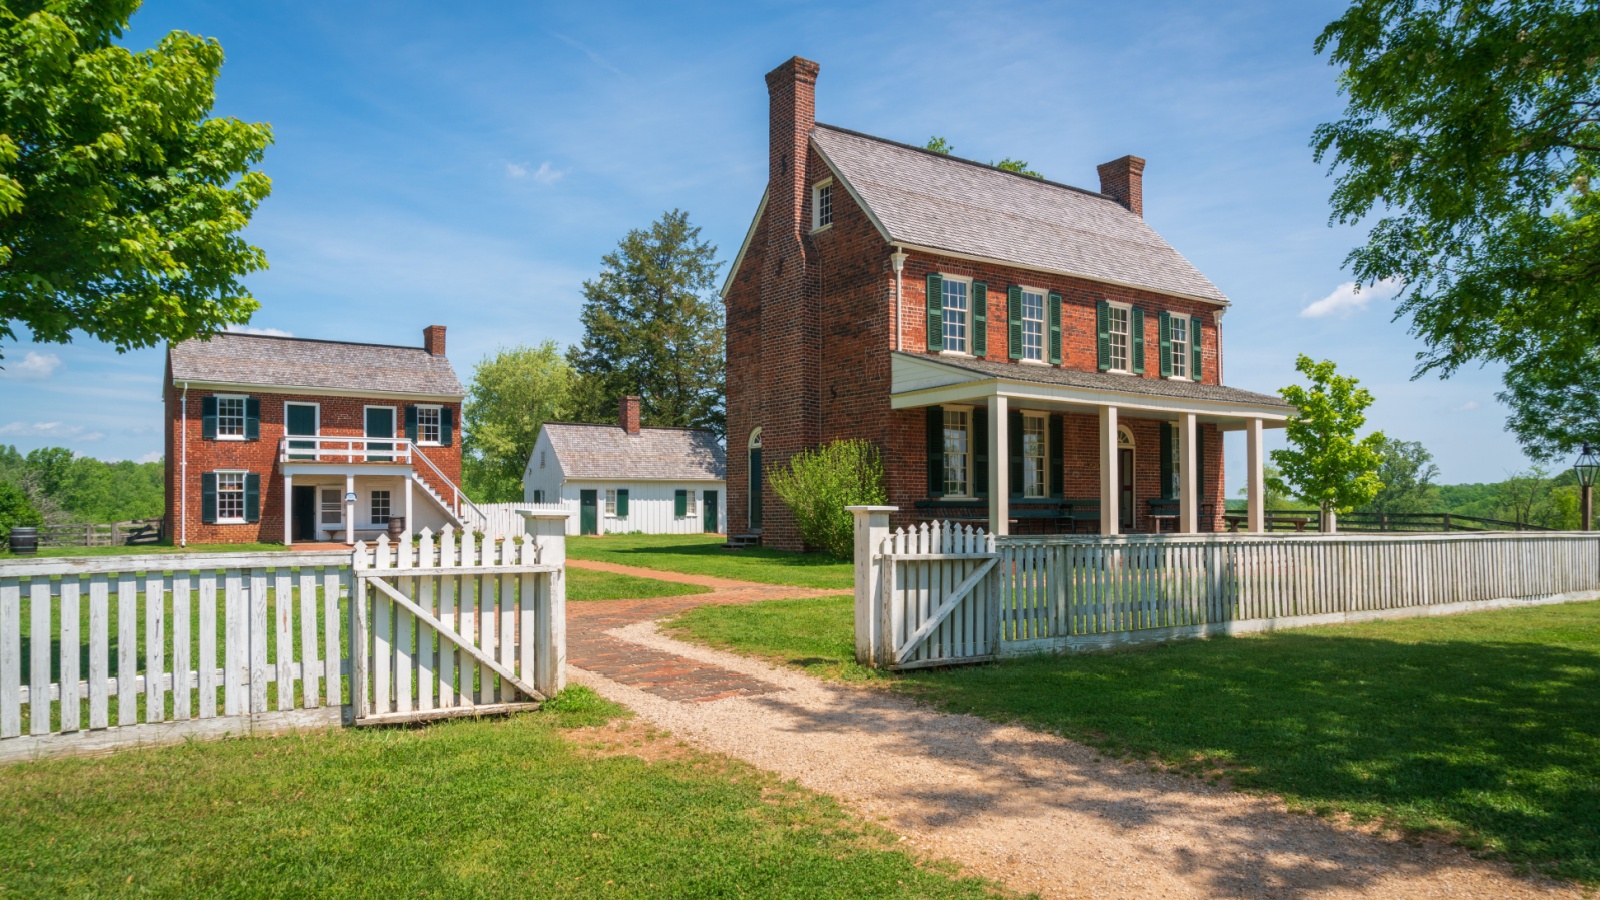 image credit: Zack Frank/Shutterstock <p>This is where General Robert E. Lee surrendered to Ulysses S. Grant, effectively ending the Civil War. The Appomattox Court House National Historical Park is now a symbol of national reconciliation and offers educational exhibits, restored buildings, and live historical demonstrations. Tourists can walk the same ground where the final chapters of the Civil War were written.</p>